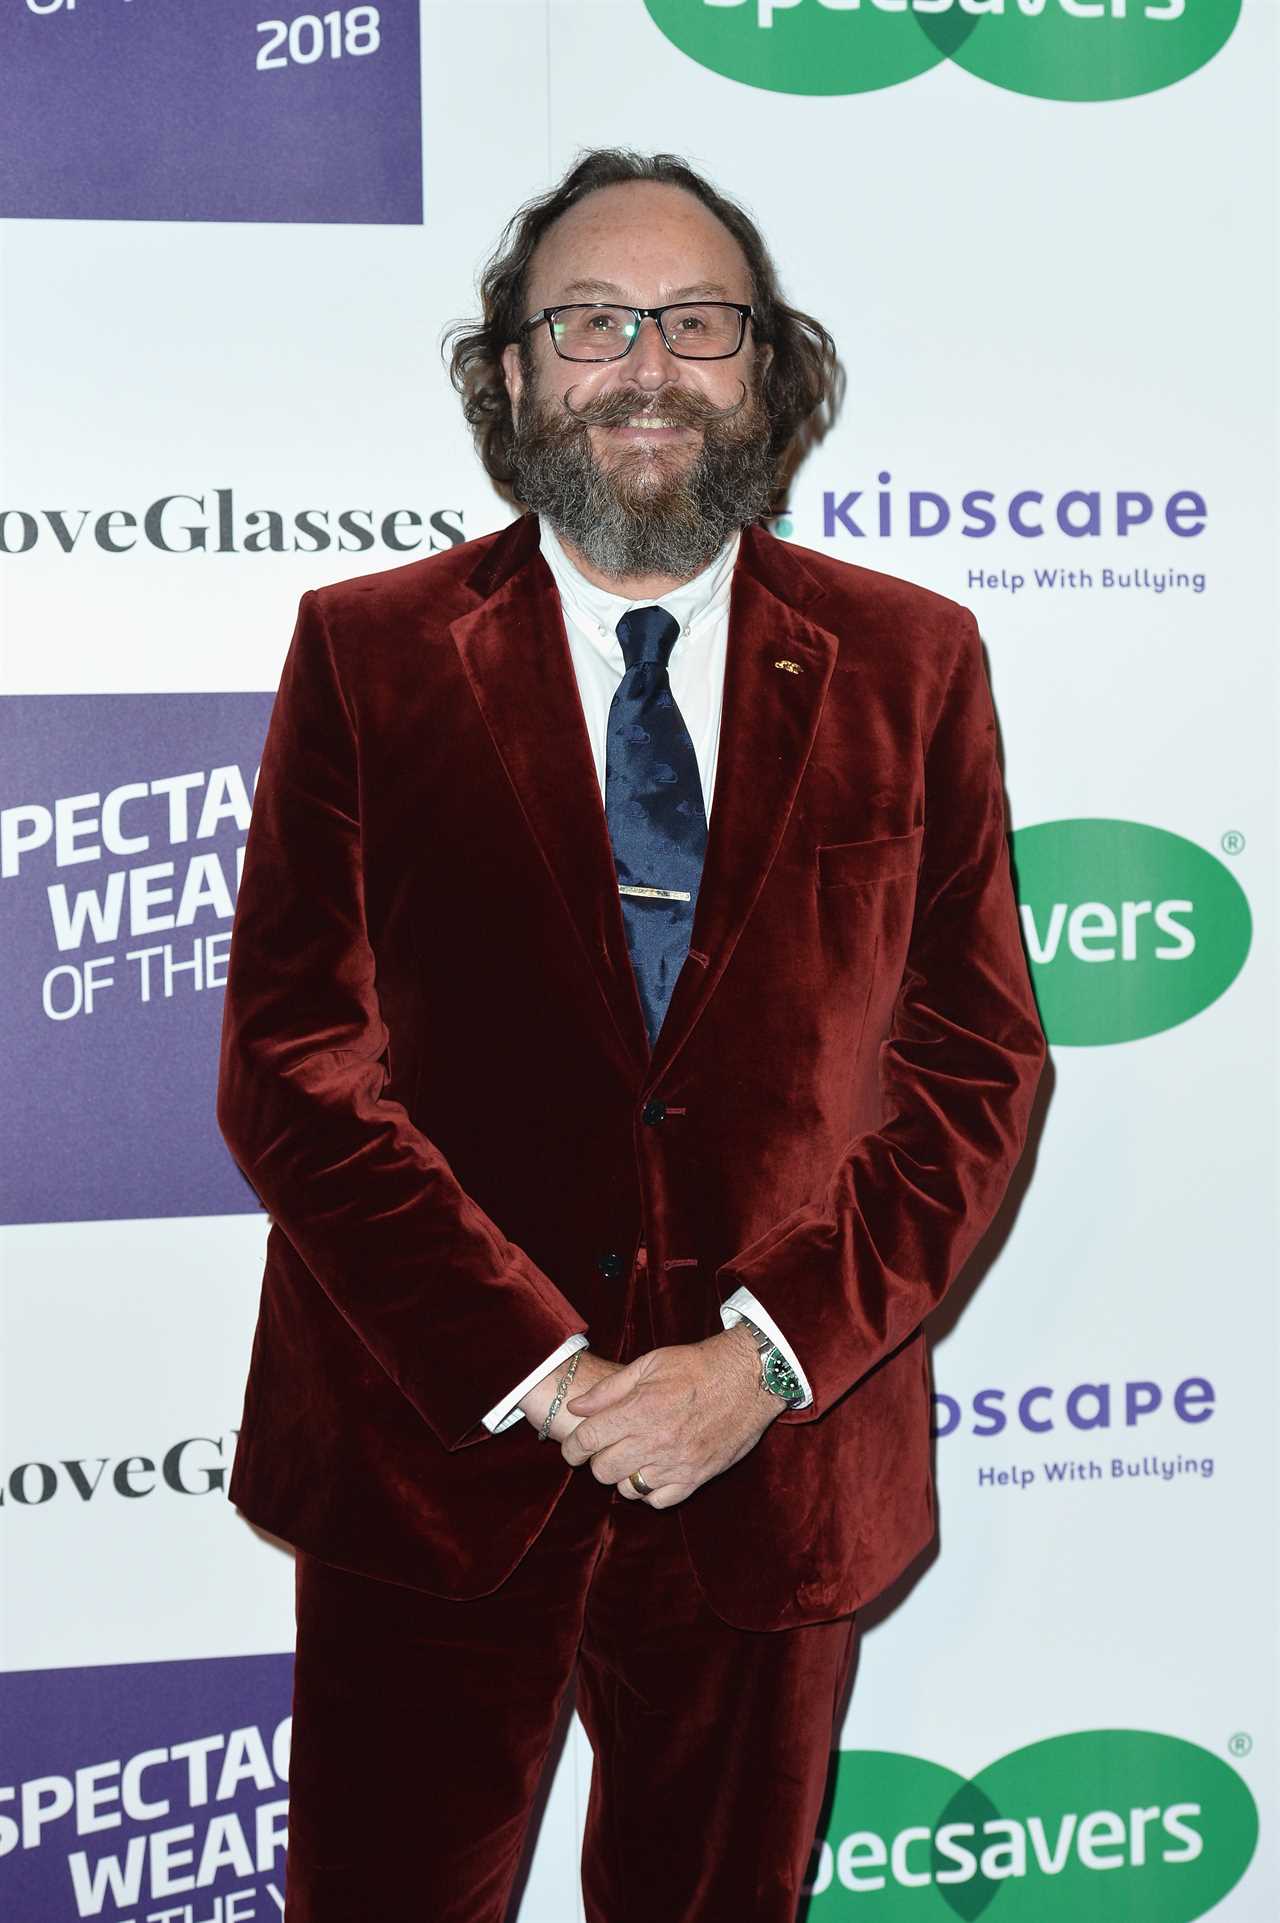 Hairy Bikers Star Dave Myers Faces Another Health Setback Amid Cancer Battle